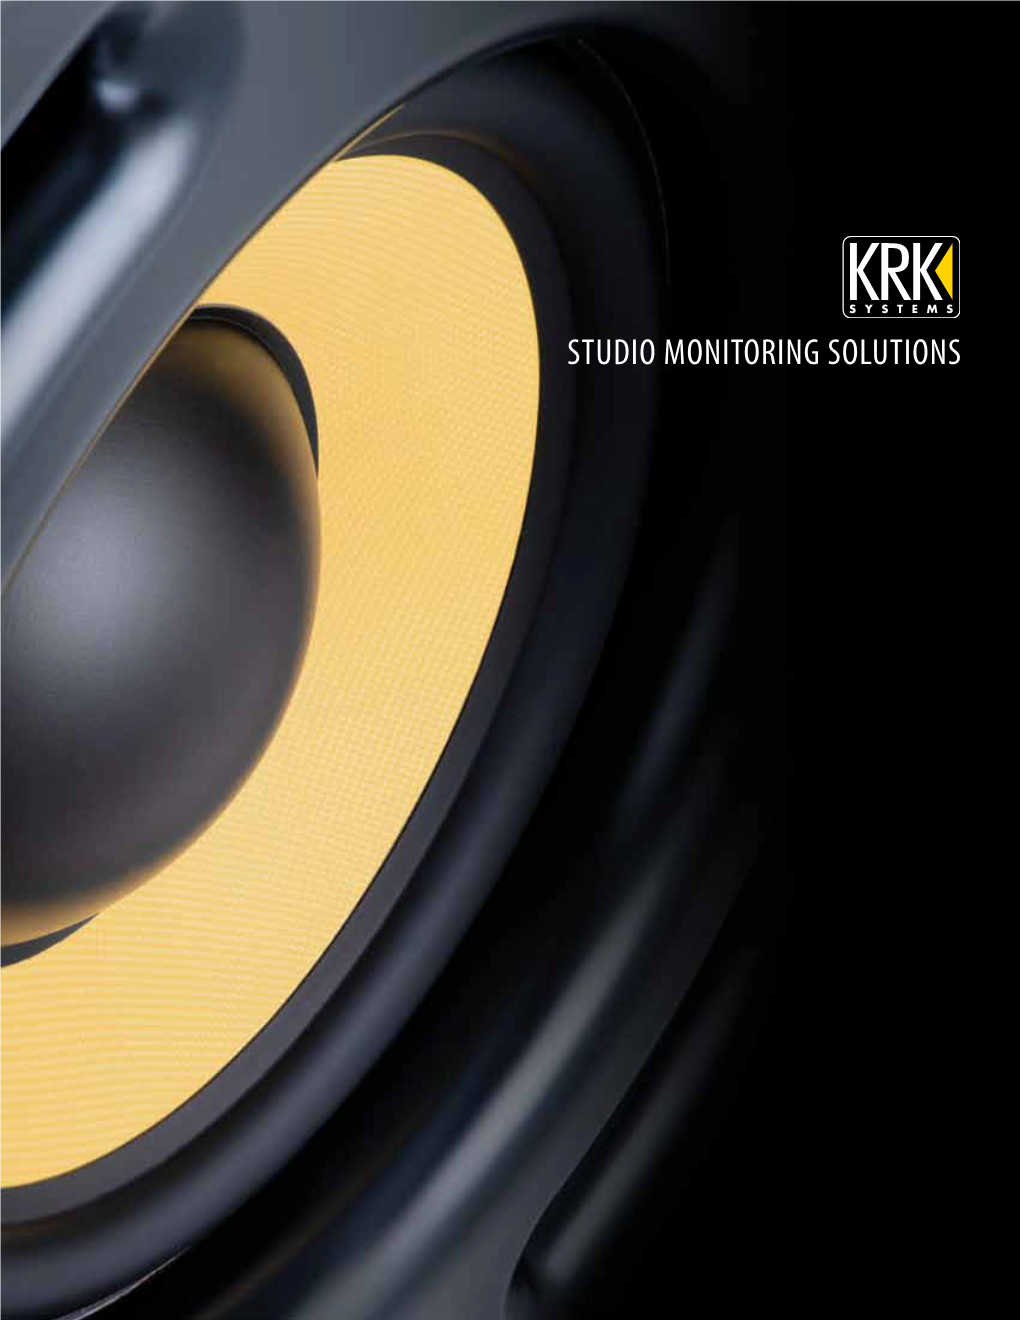 STUDIO MONITORING SOLUTIONS KRK® SYSTEMS KRK Systems Is One of the World’S Most Respected Manufacturers of Studio Reference Monitors